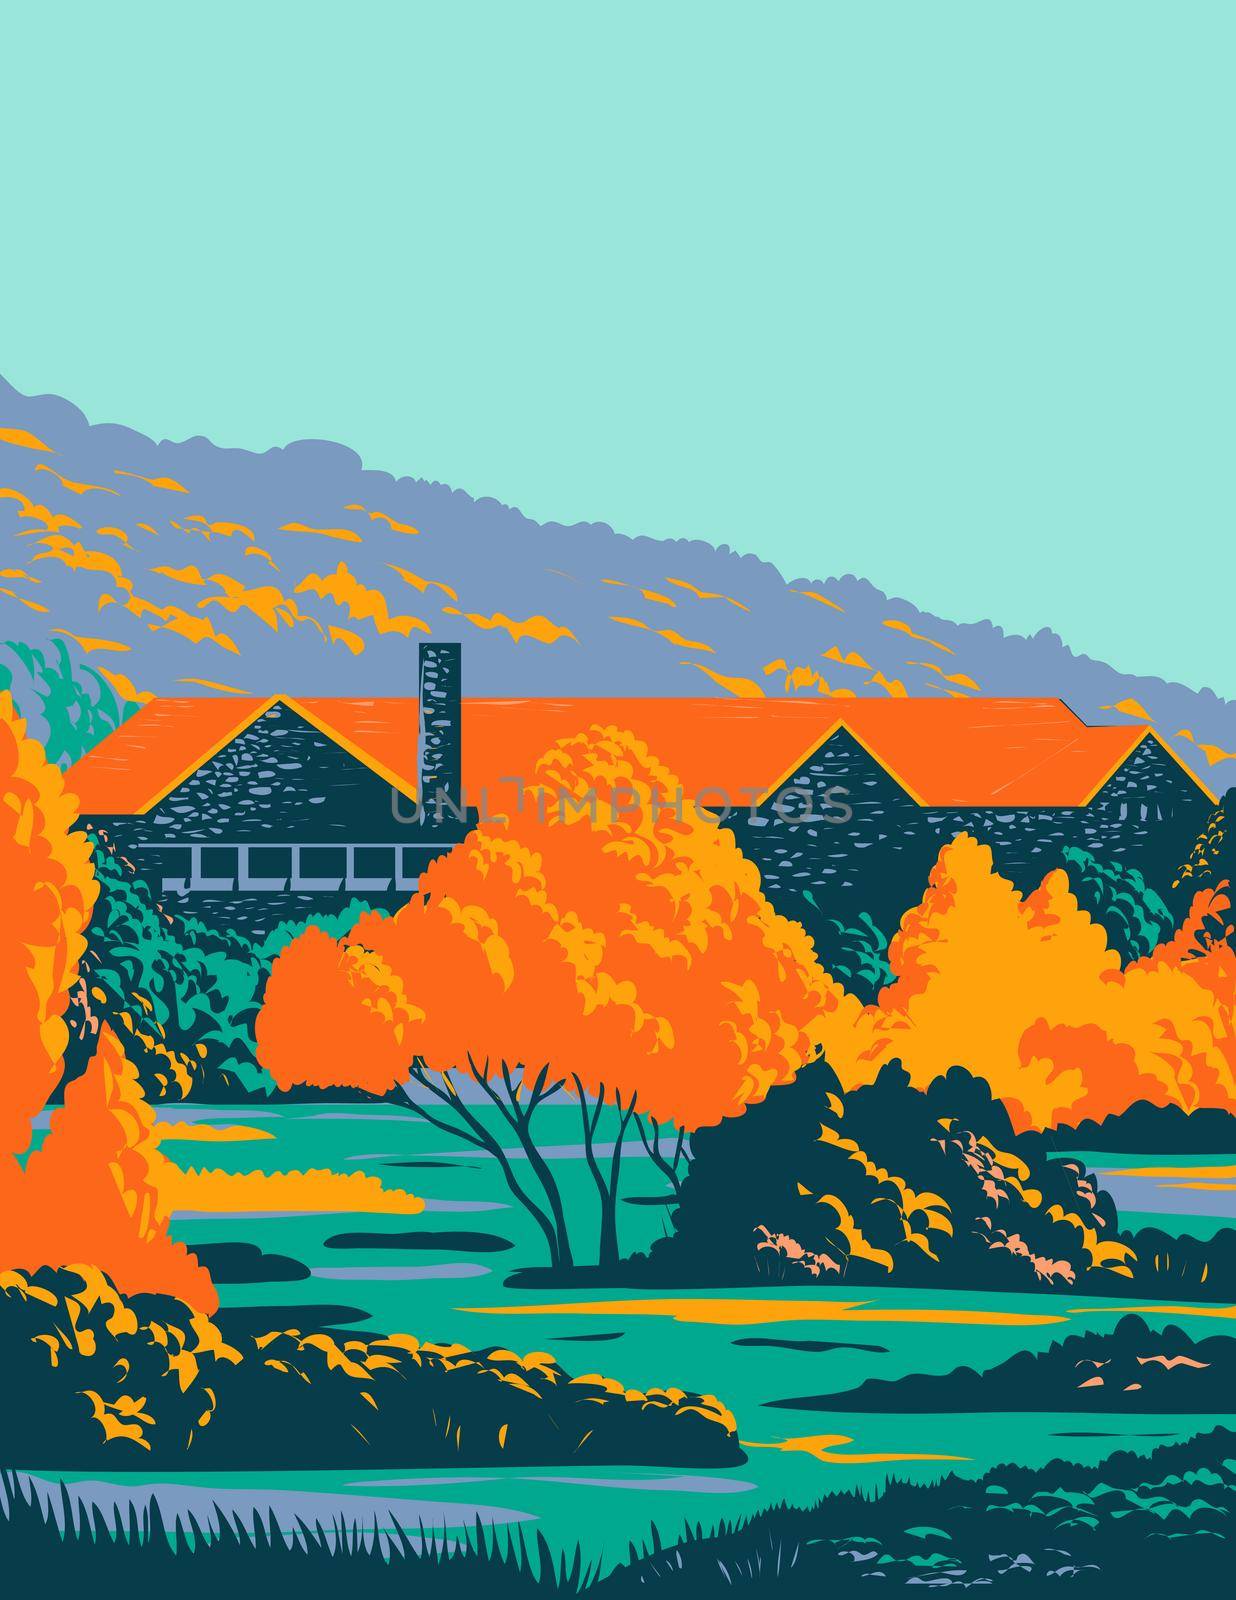 WPA poster art of the stone lodge with red roof and trees in front during fall or autumn done in works project administration or federal art project style.
